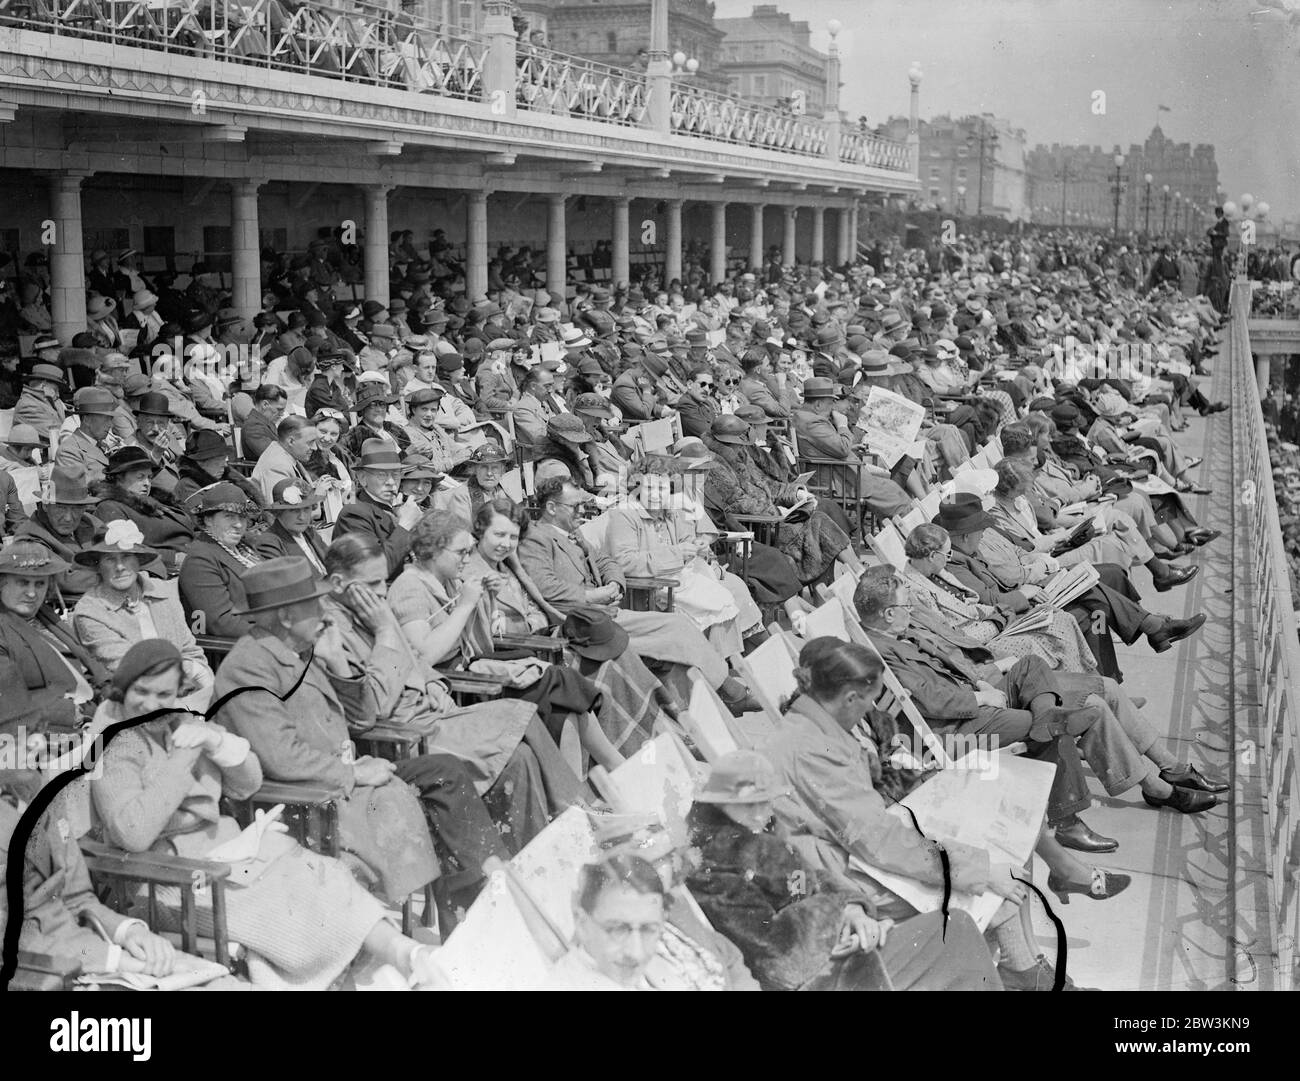 Holiday Crowds Find the Sun at Eastbourne Although London shivered in cold wind thousands of visitors found the sun in holiday mood at Eastbourne. Large crowds thronged the beach . Photo Shows : The packed front at Eastbourne today ( Whit - Sunday ) 31 May 1936 Stock Photo